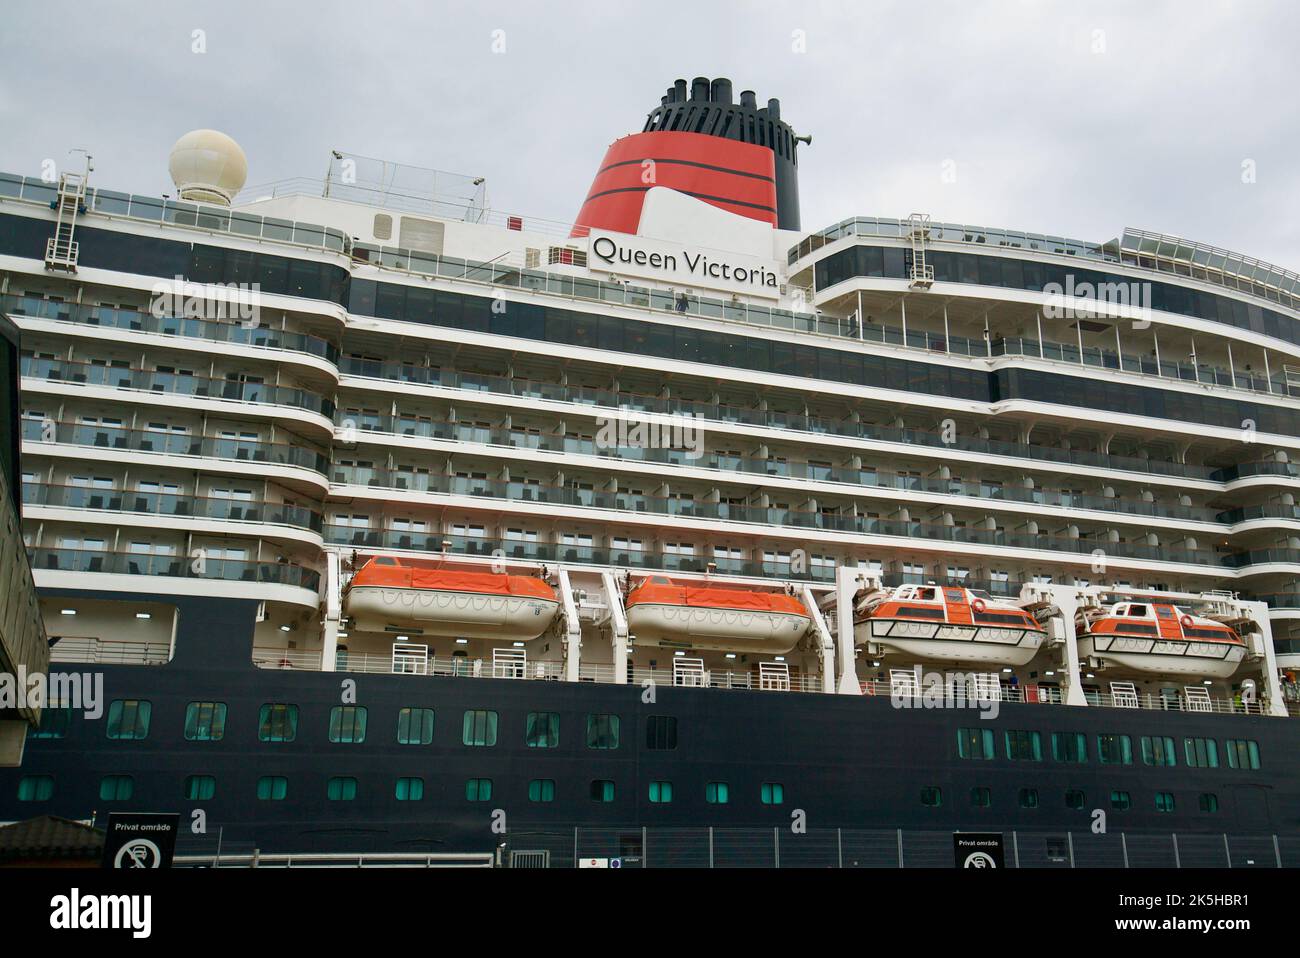 Side view of the Cunard Queen Victoria cruise ship, looking at the name plaque and the balconies and chimney. Stock Photo